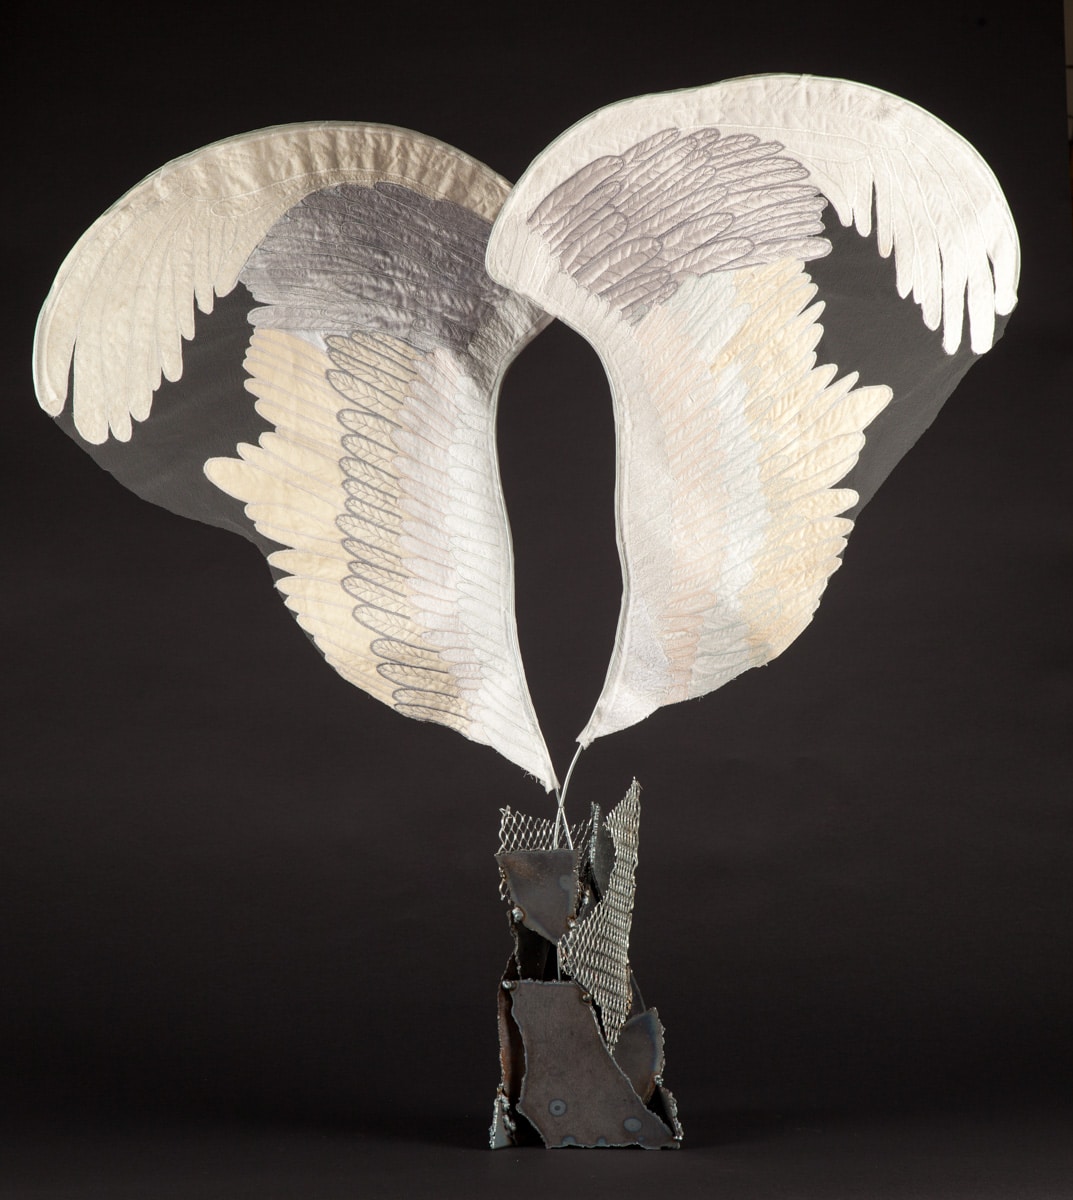 Welded steel base erupts into soft looking fabric wings.